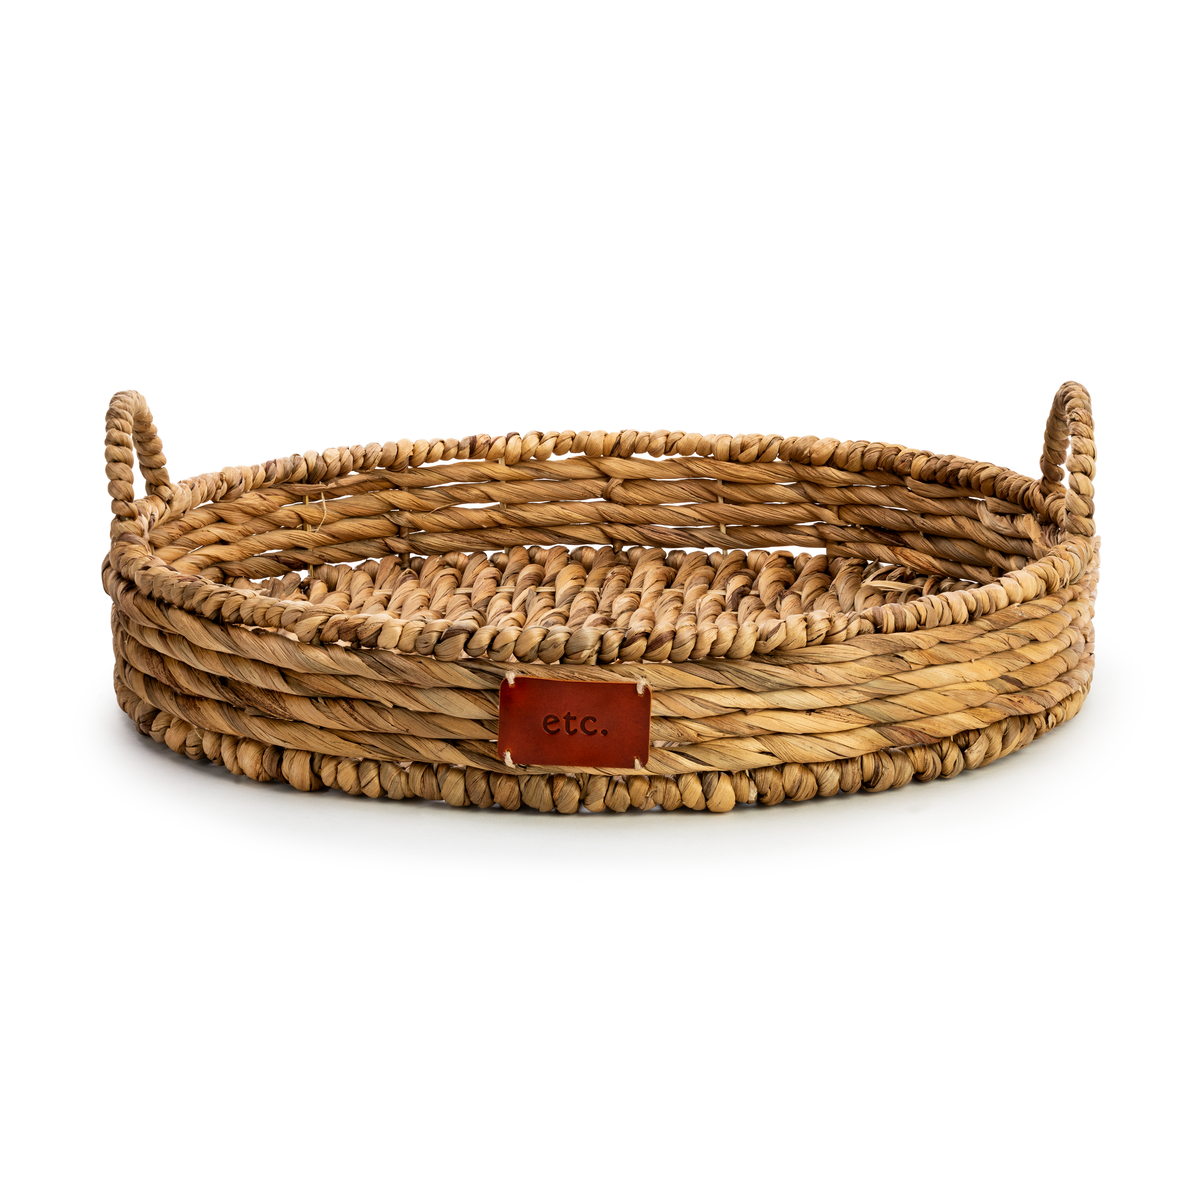 Round wicker basket with patch